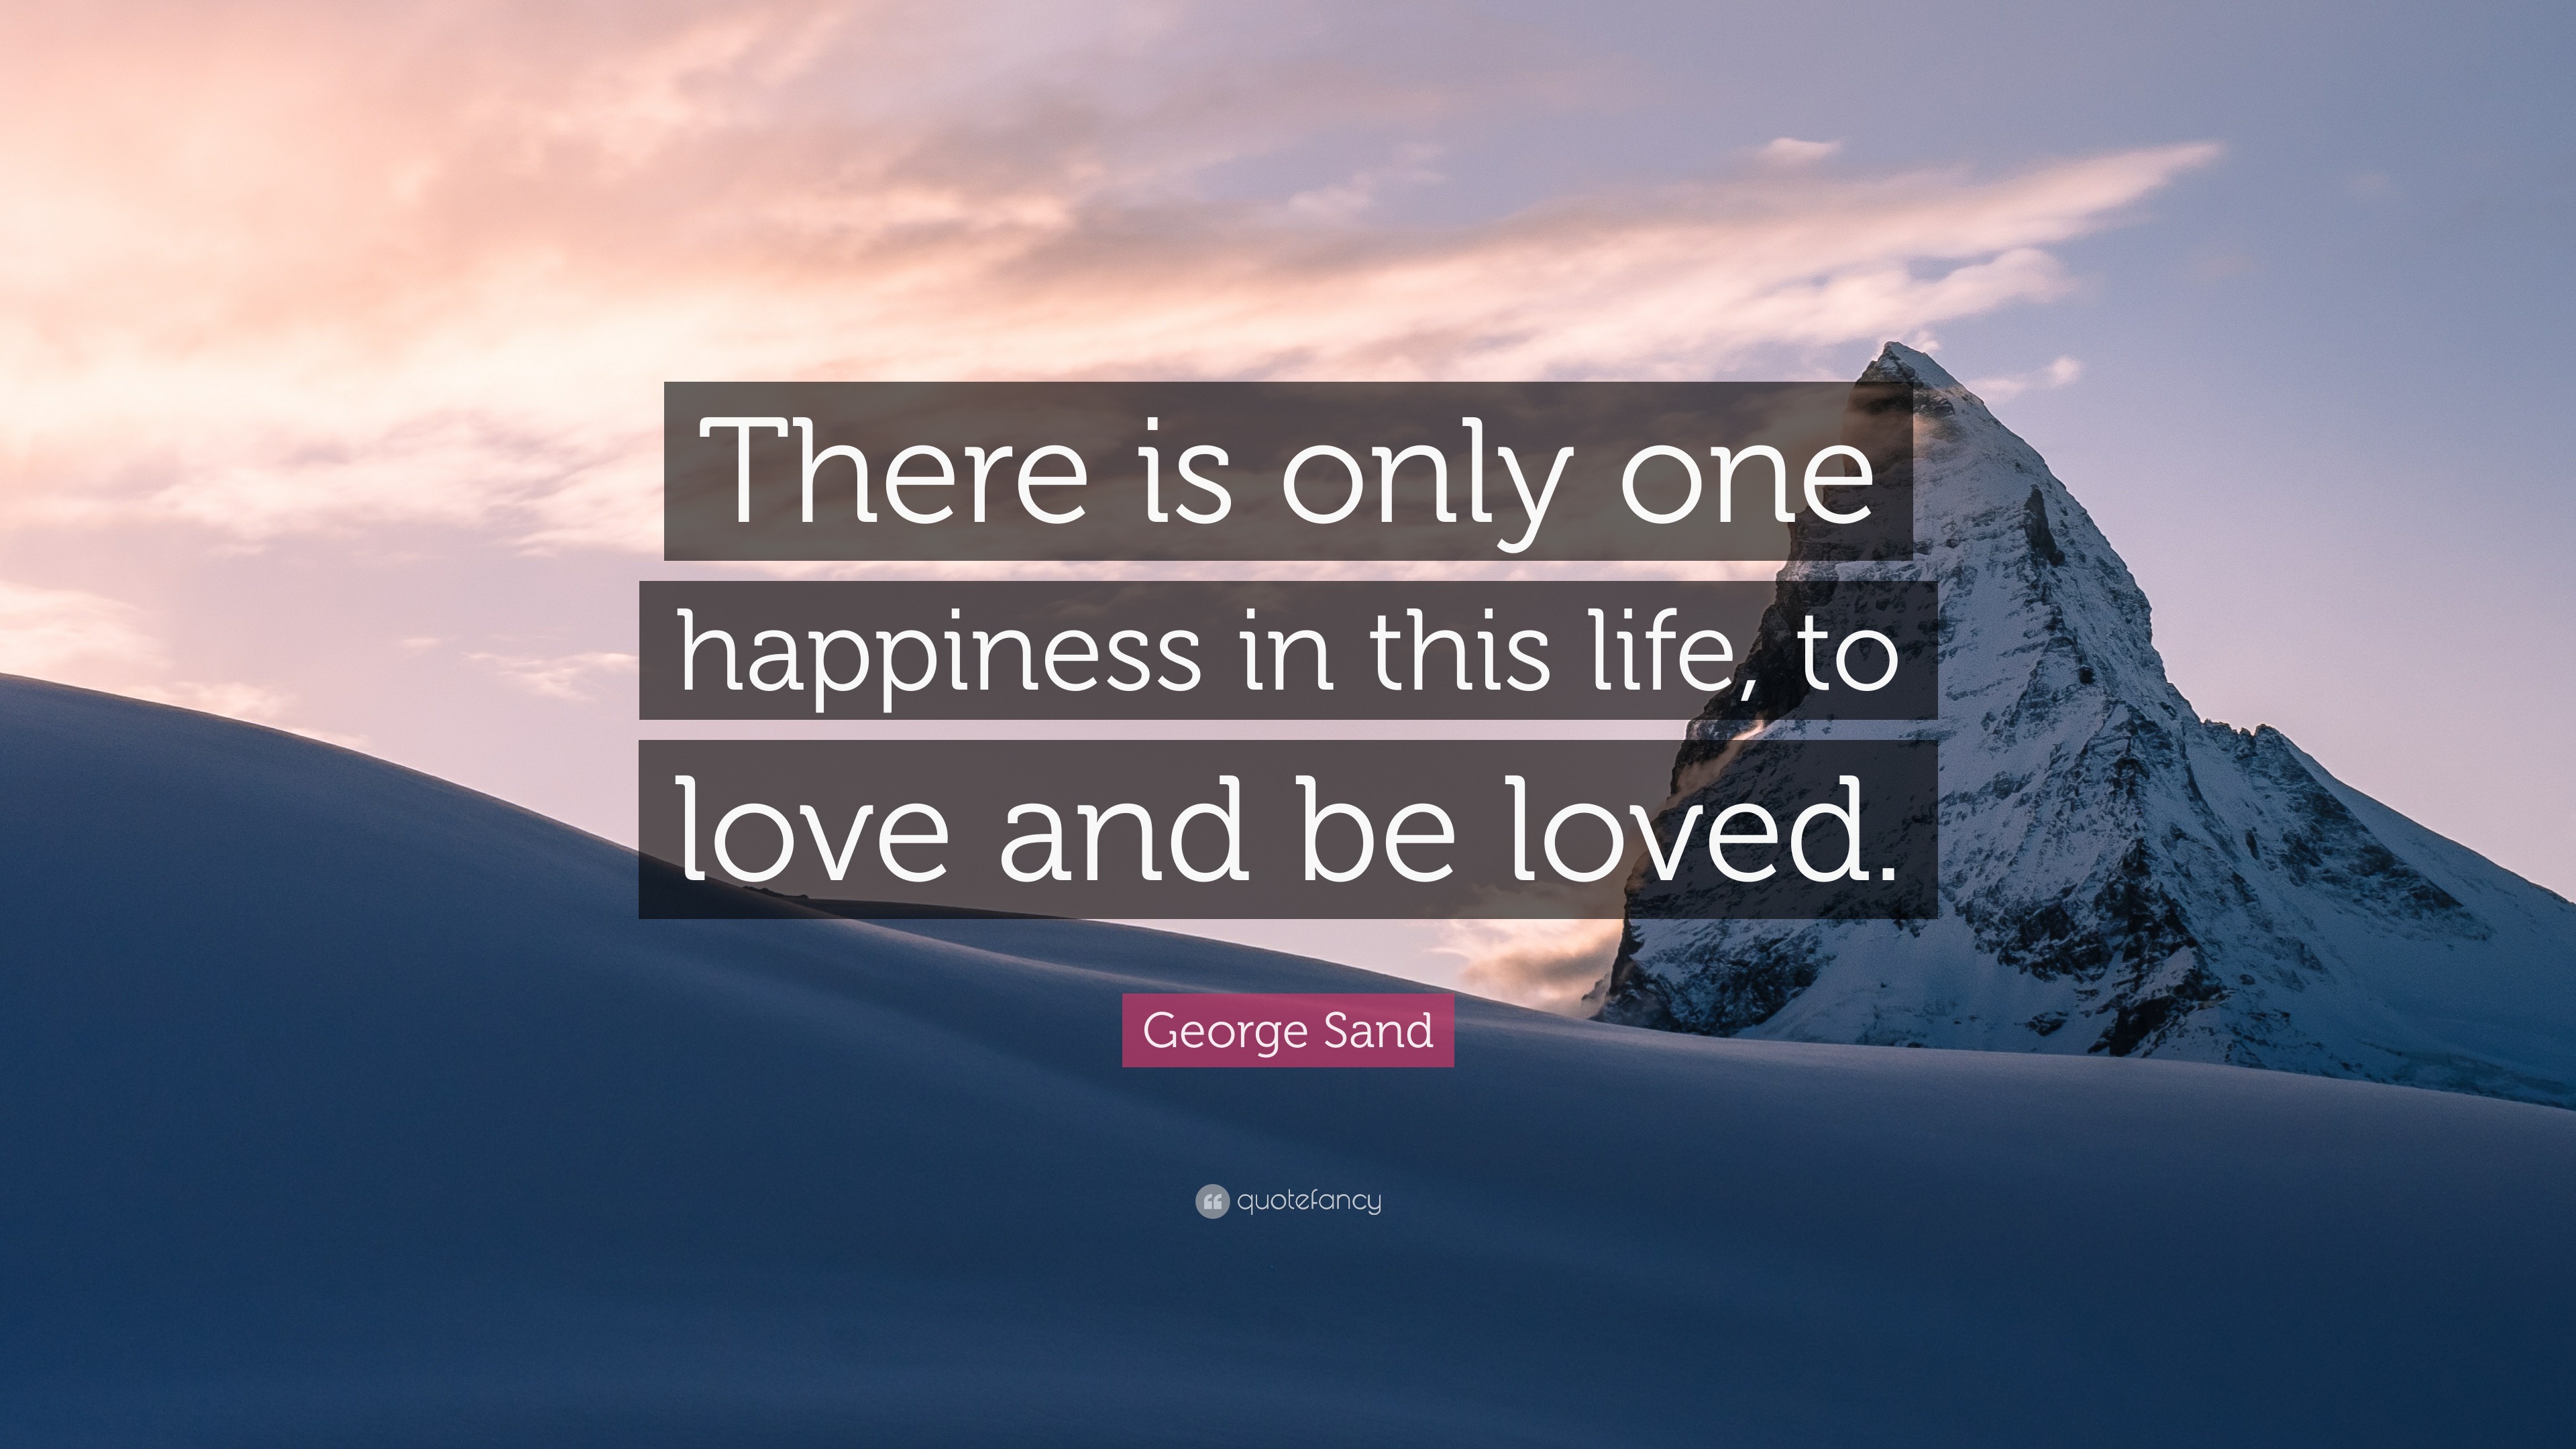 George Sand Quote: “There is only one happiness in this life, to love ...